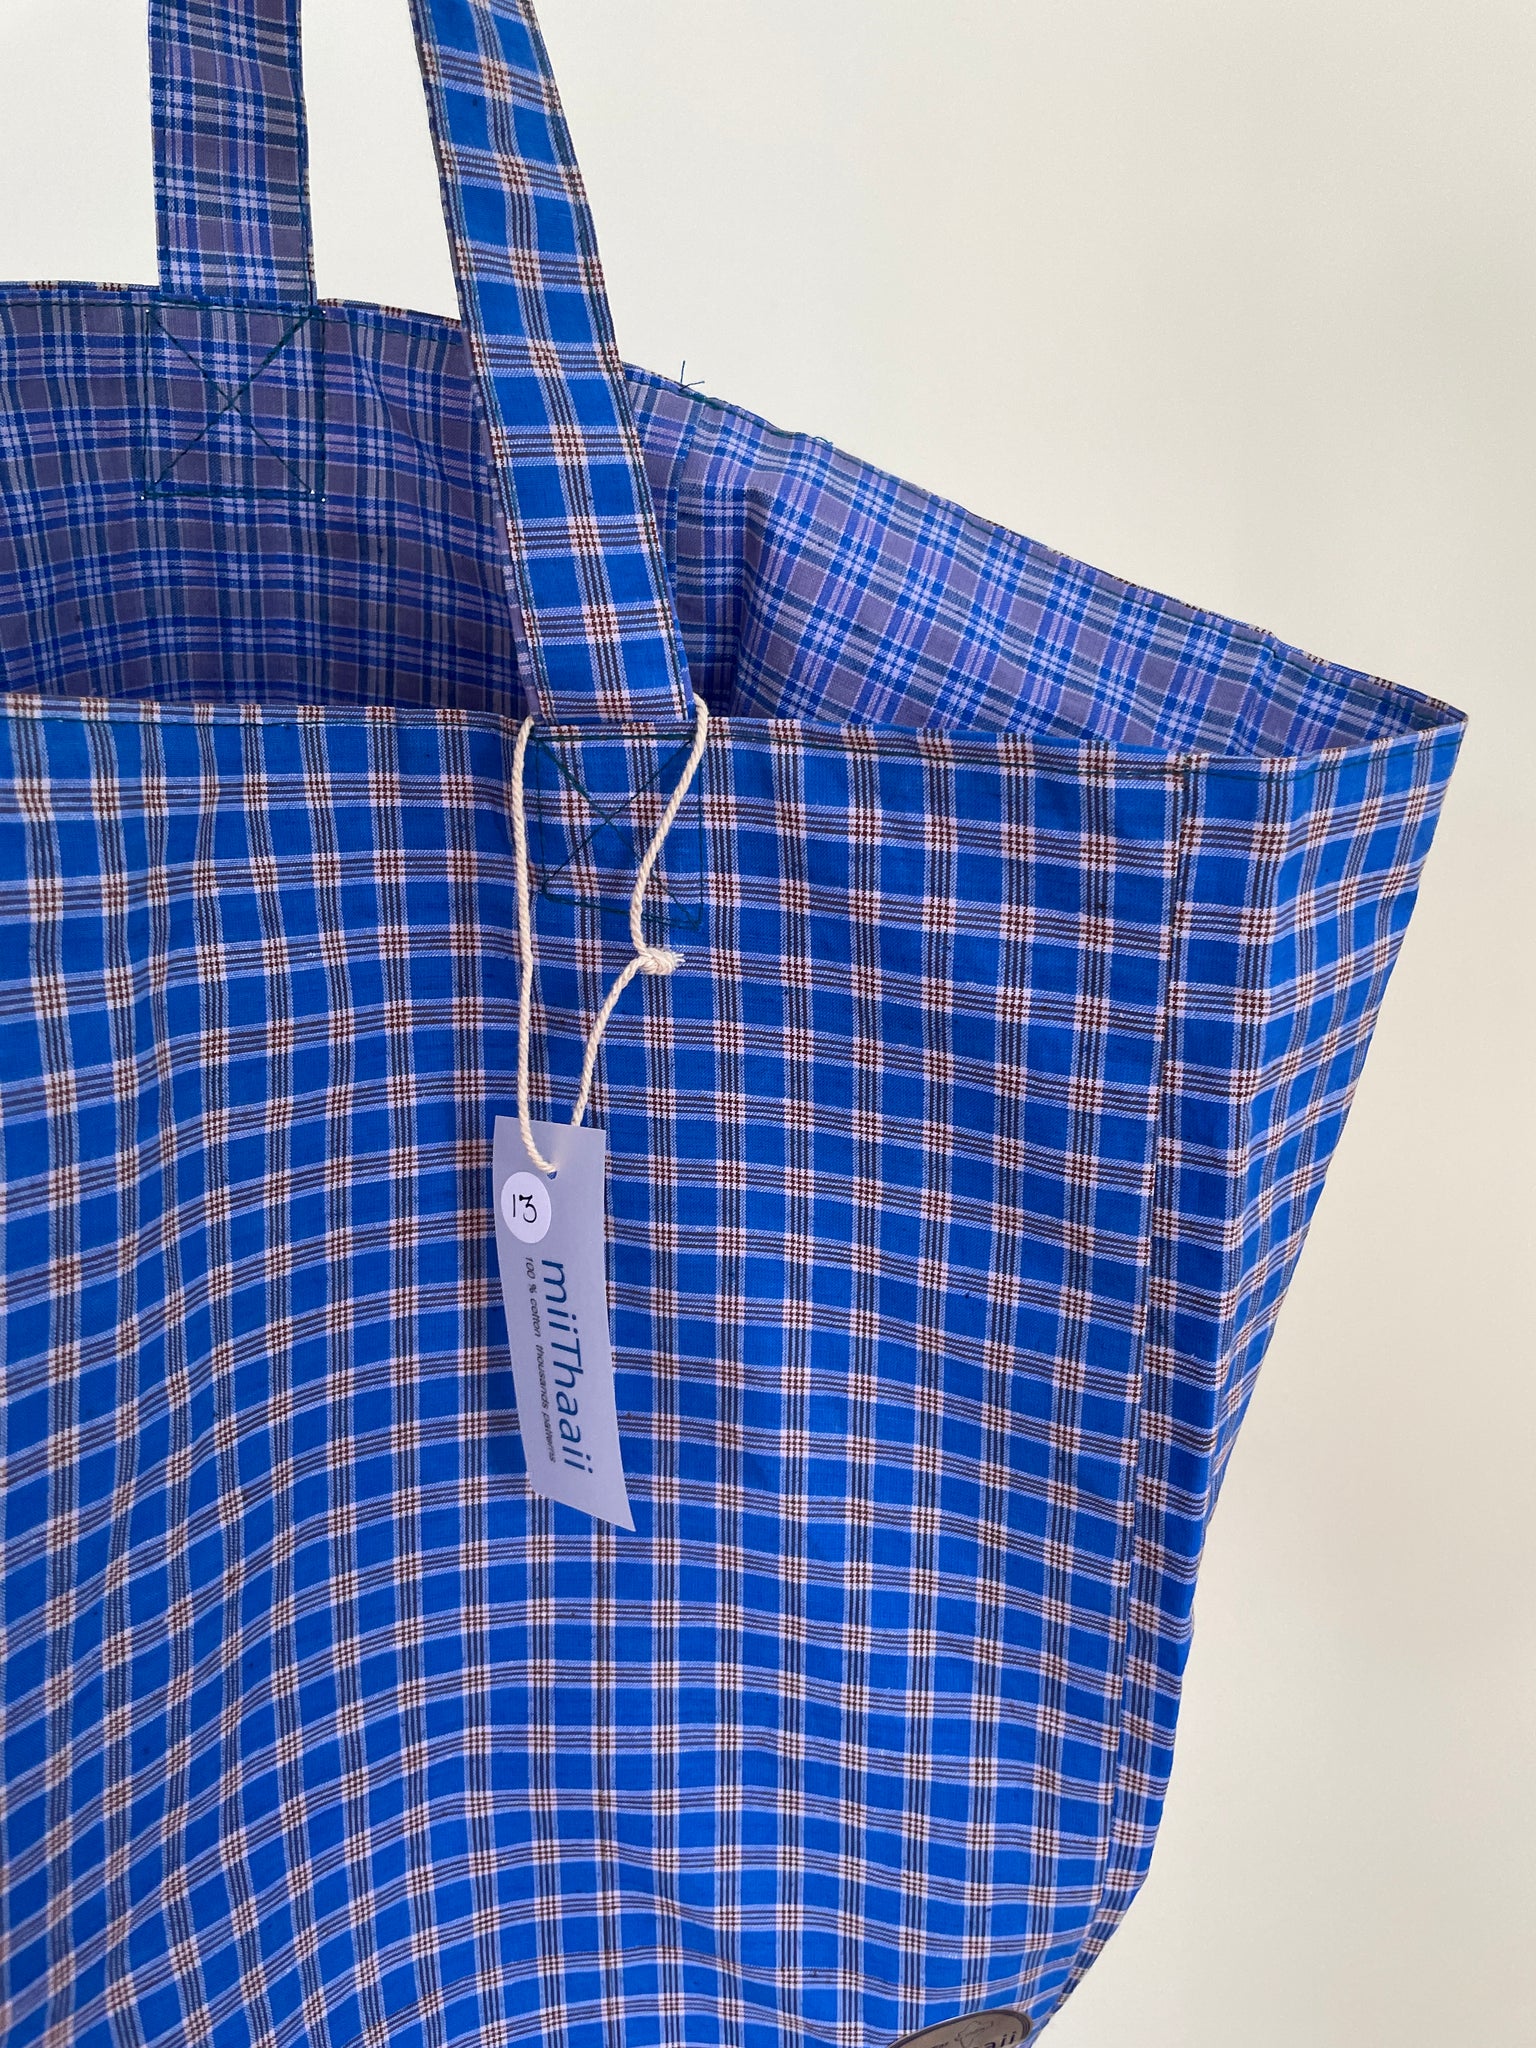 Reversible Cotton Tote Bag (assorted blue checks), by MiiThaaii